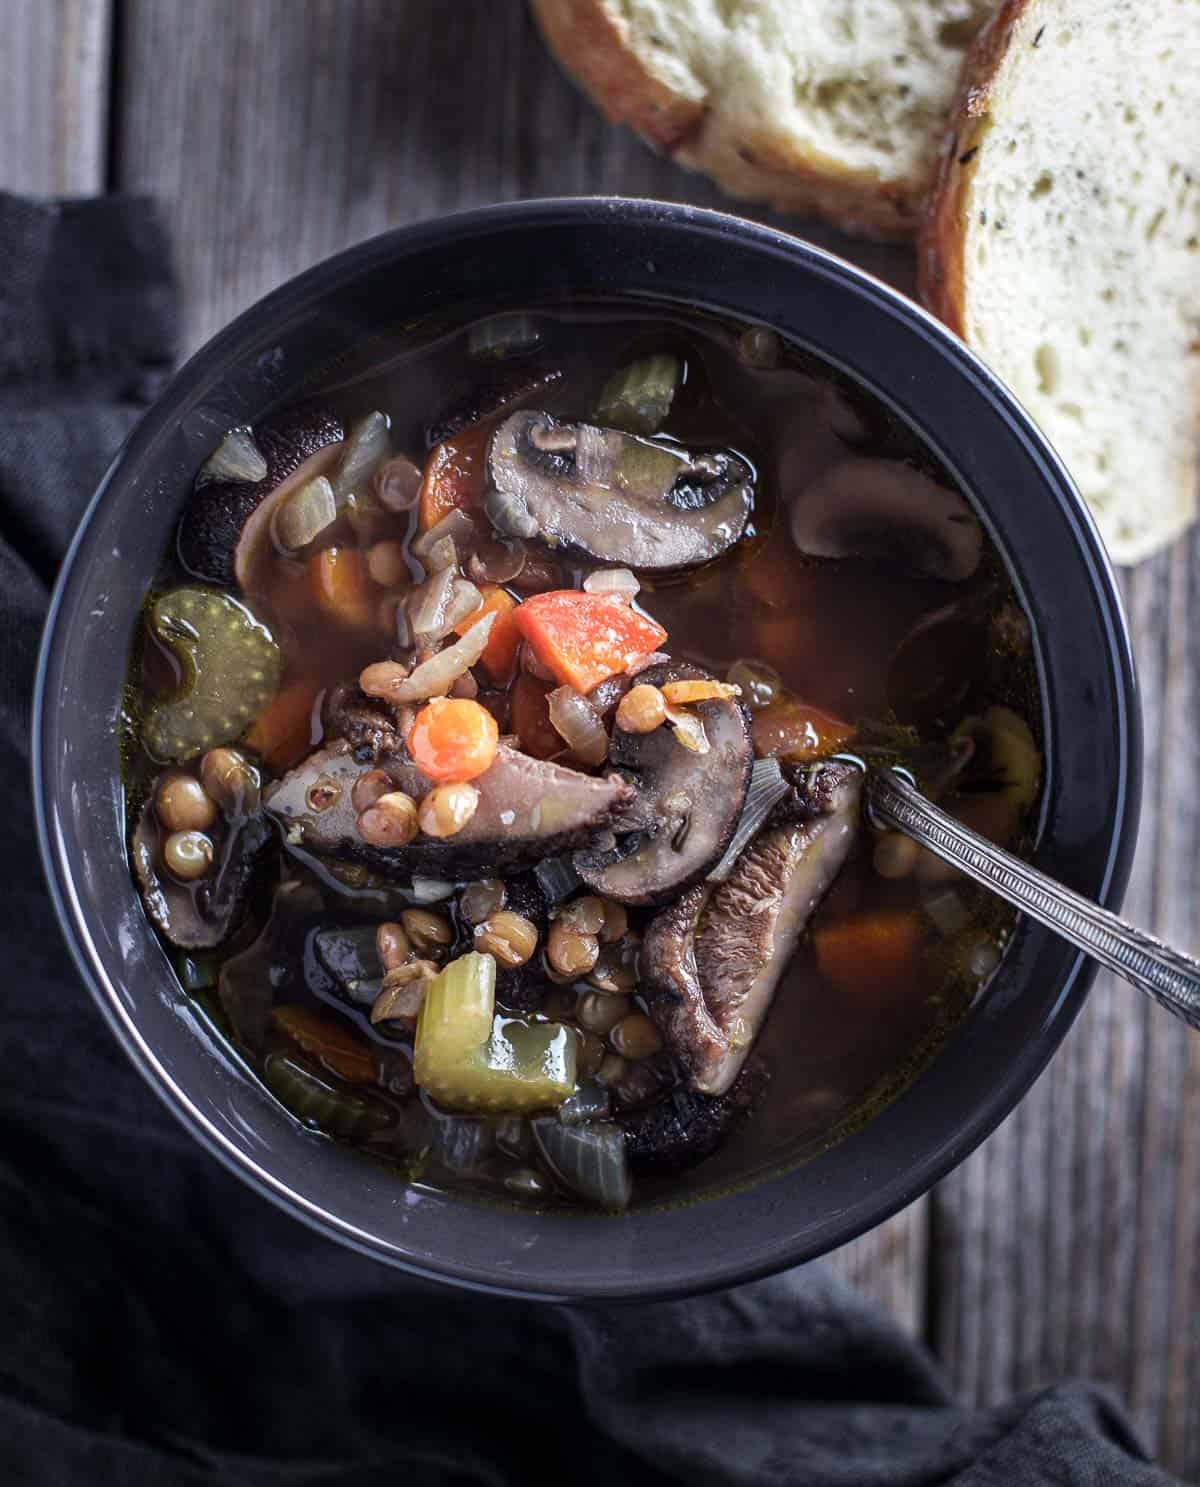 Lentil soup with smoked mushrooms in a bowl